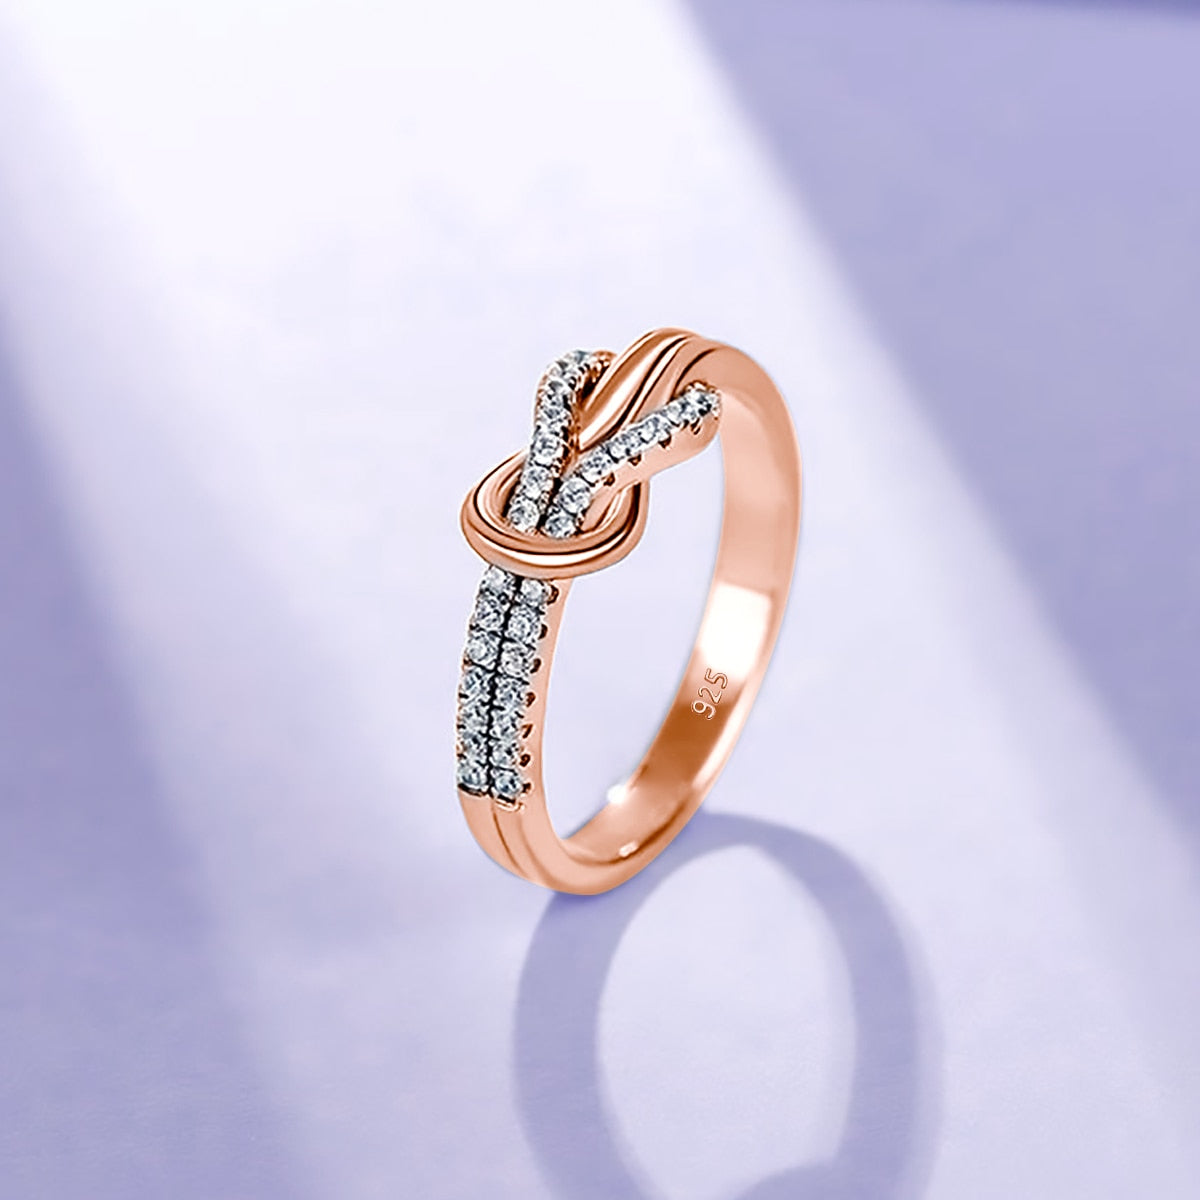 A rose gold half pave infinity knot ring.